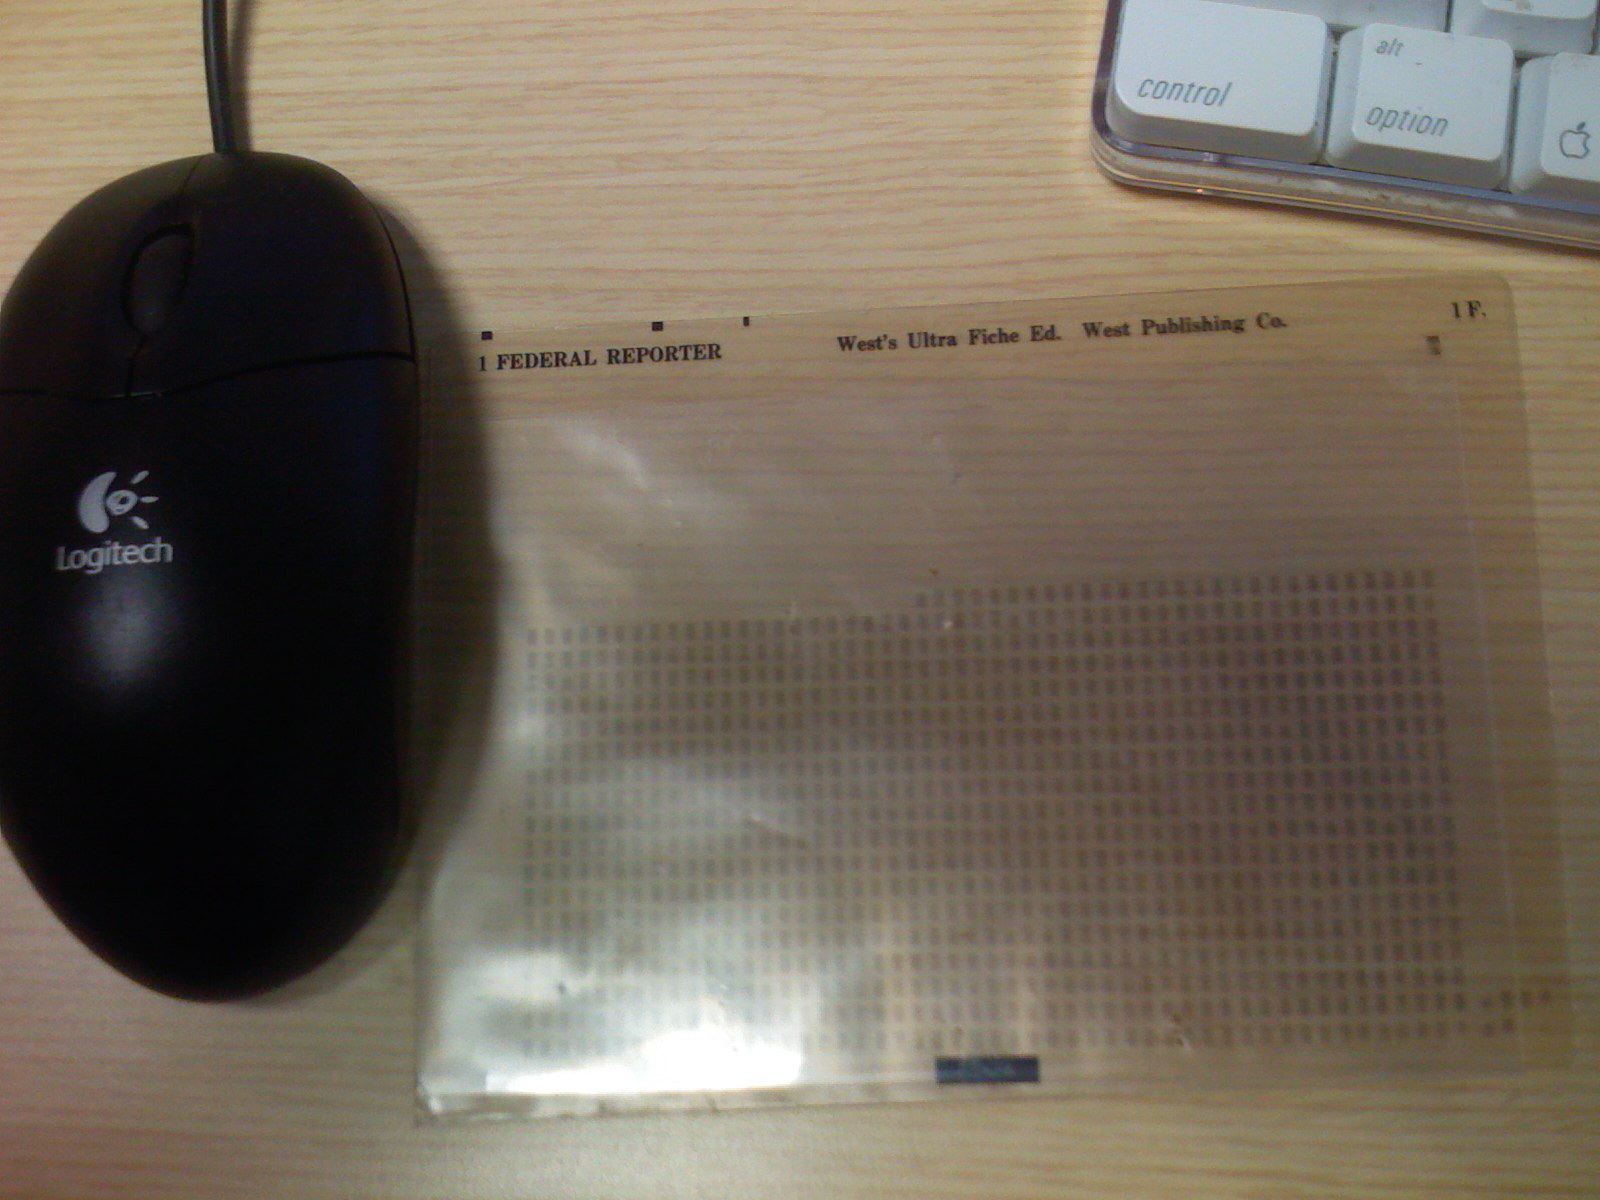 Westlaw ultrafiche, shown next to a computer mouse